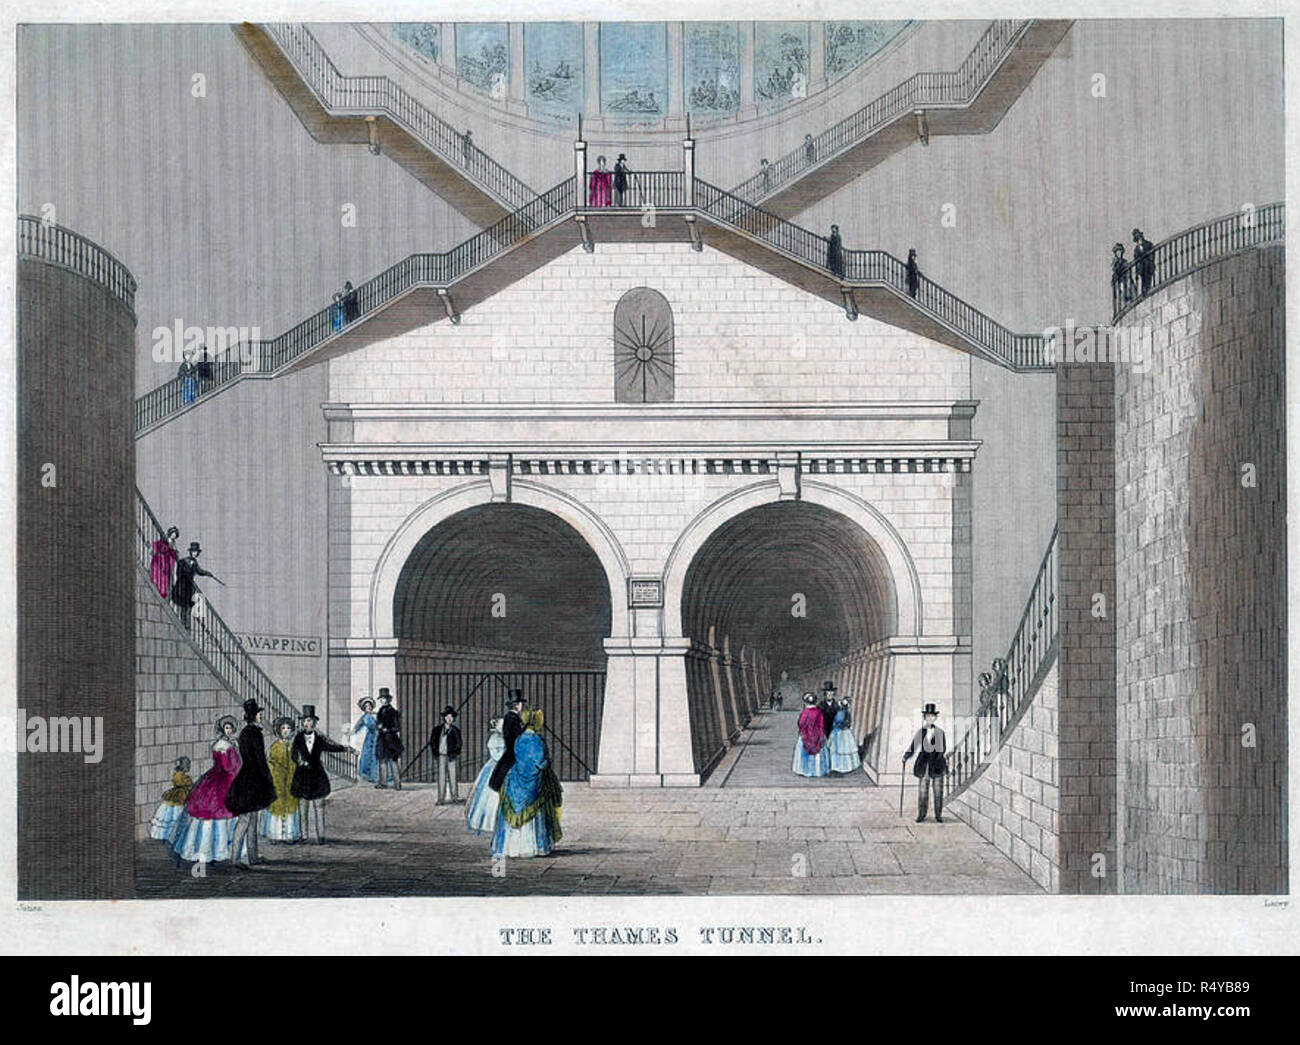 THAMES TUNNEL London, between Rotherhide and Wapping with the stairwell at top shortly after opening in March 1843 Stock Photo